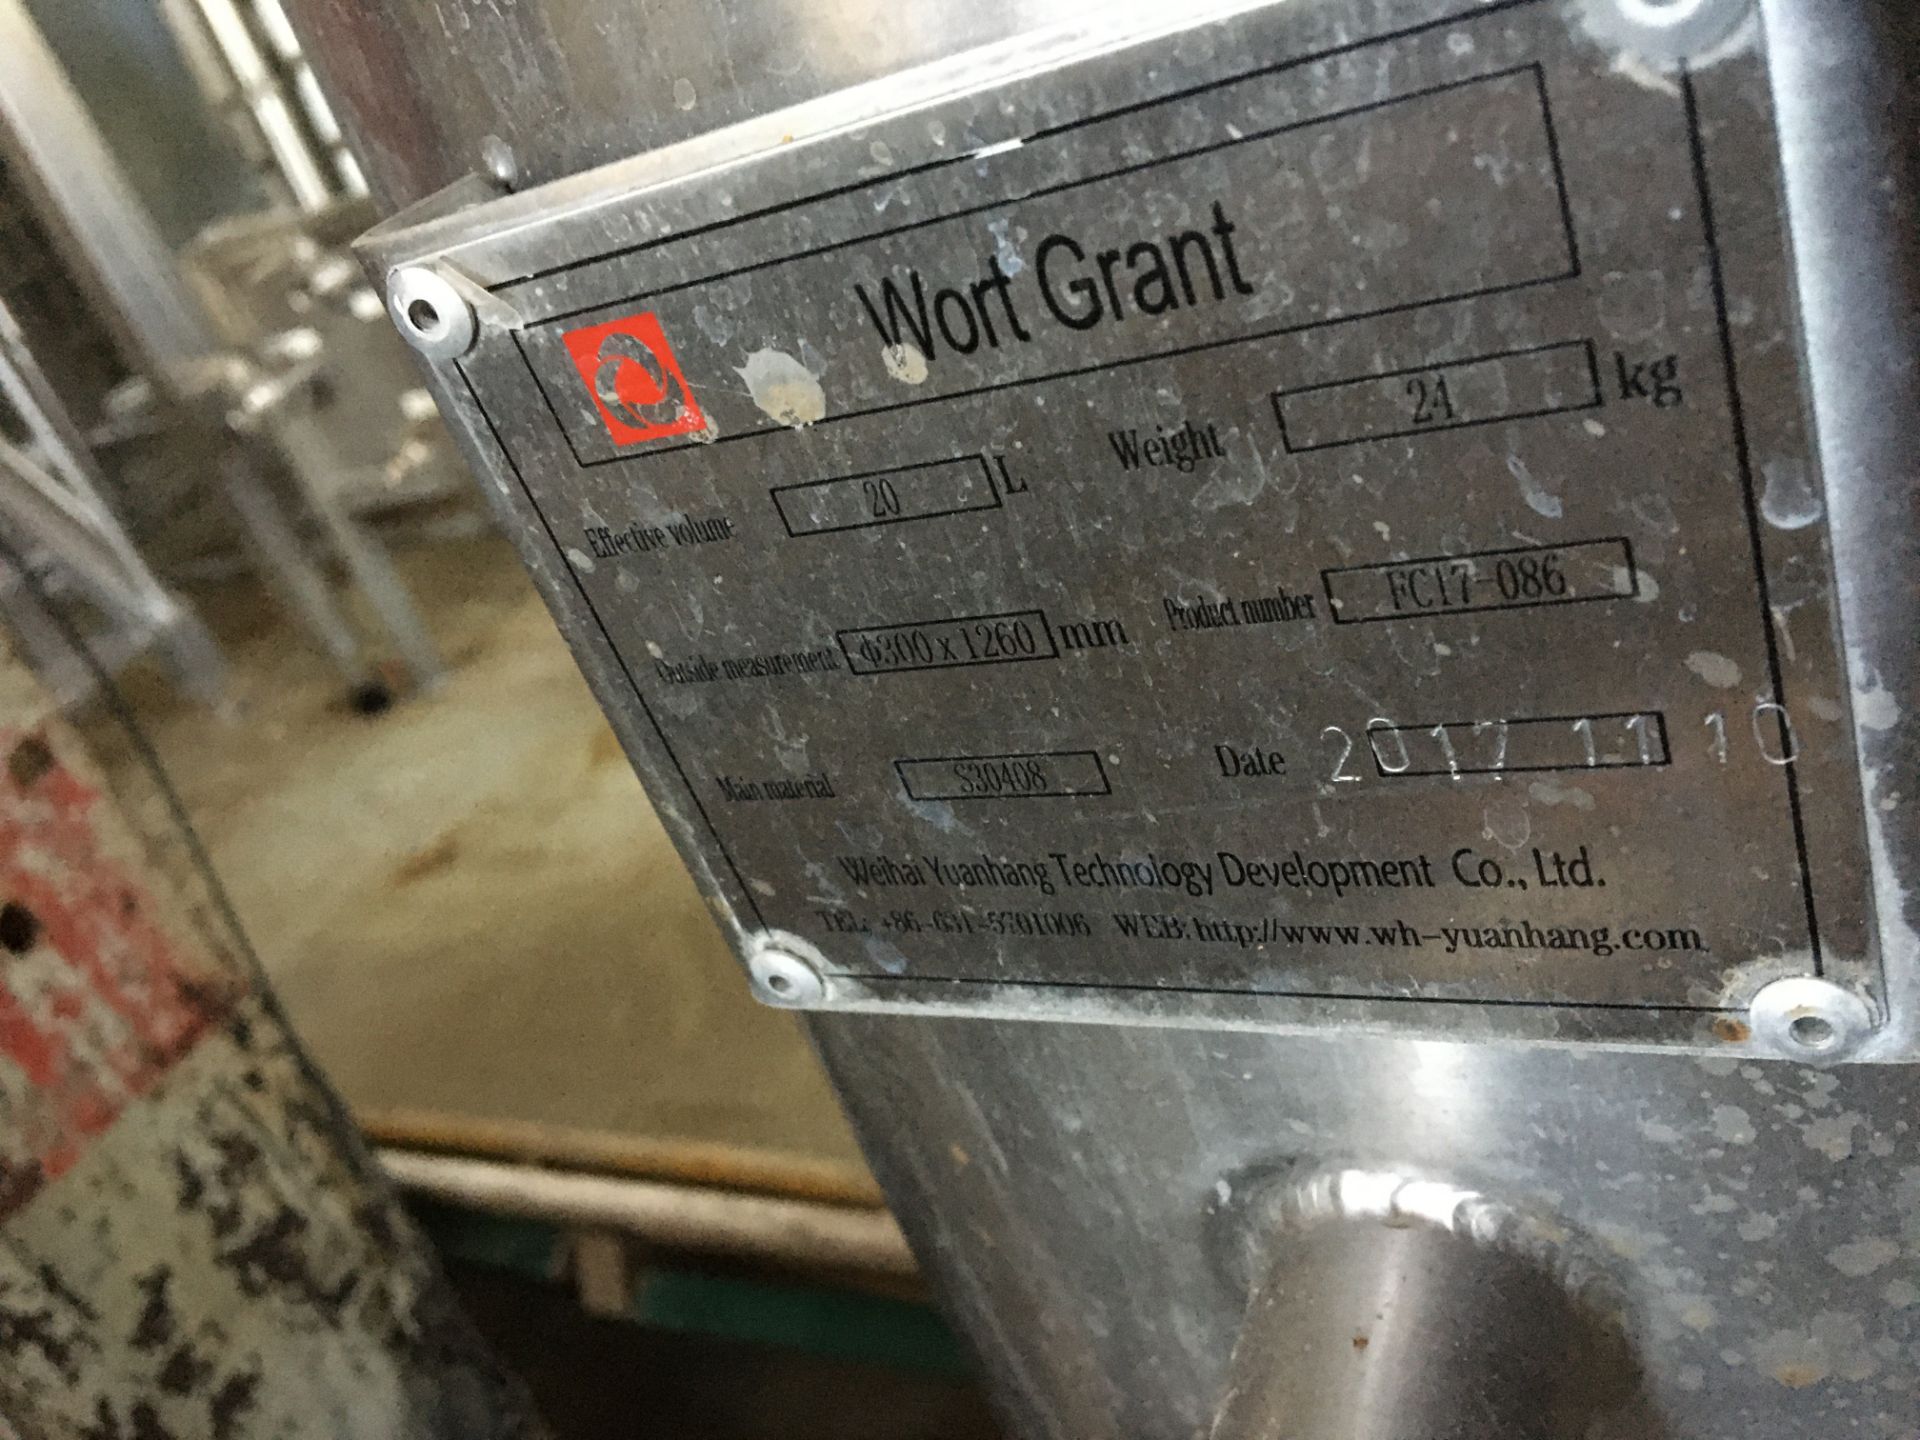 20-L Minnetonka Wort Grant, Stainless Steel; Vessel is a buffer tank between grain and wort (2017) - Image 7 of 10